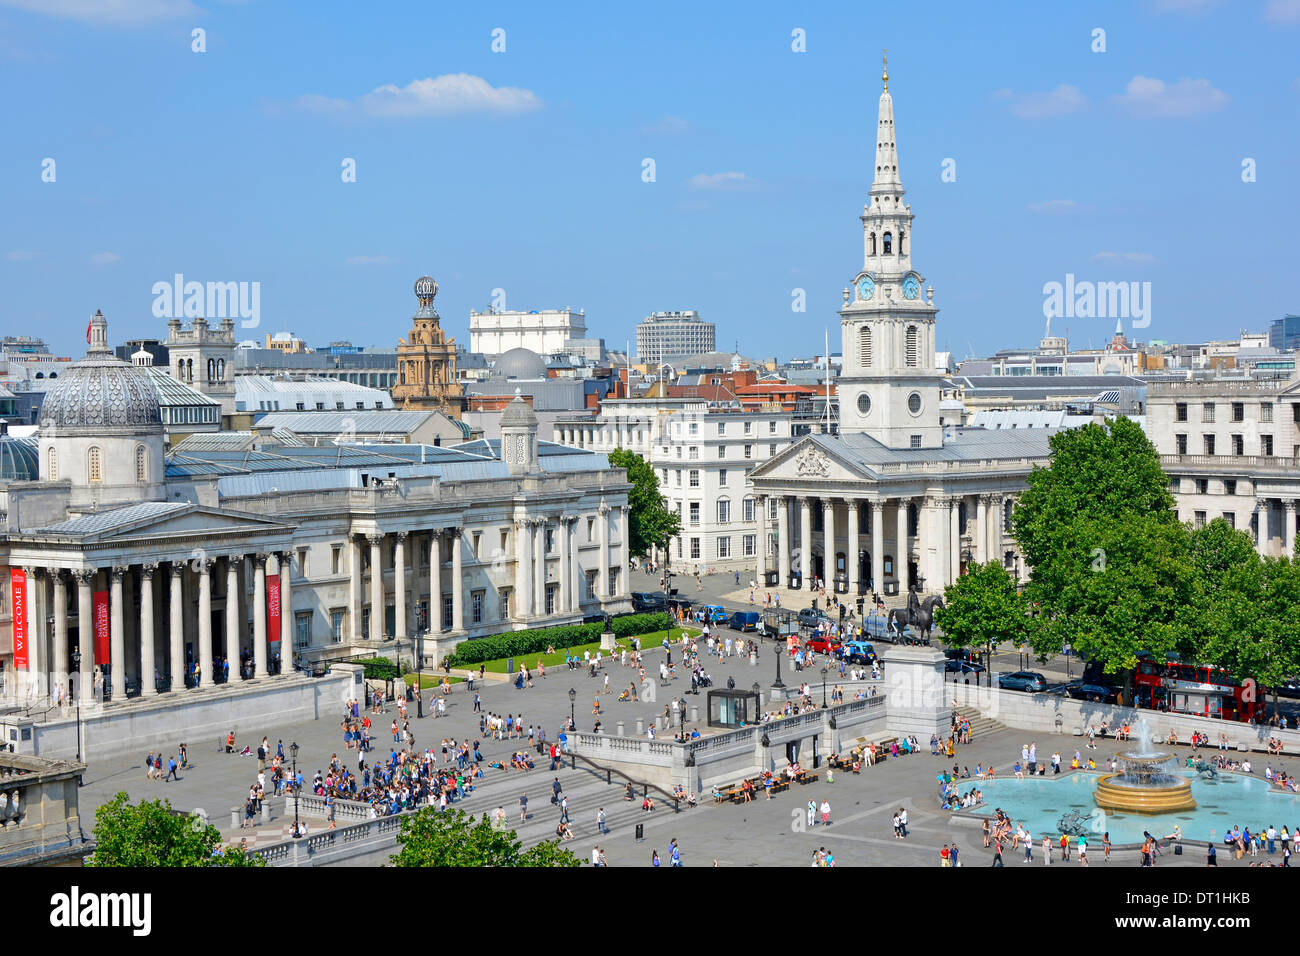 Aerial view tourists & people blue sky day in Trafalgar Square includes National Gallery colonnade spire of St Martin in the Fields London England UK Stock Photo